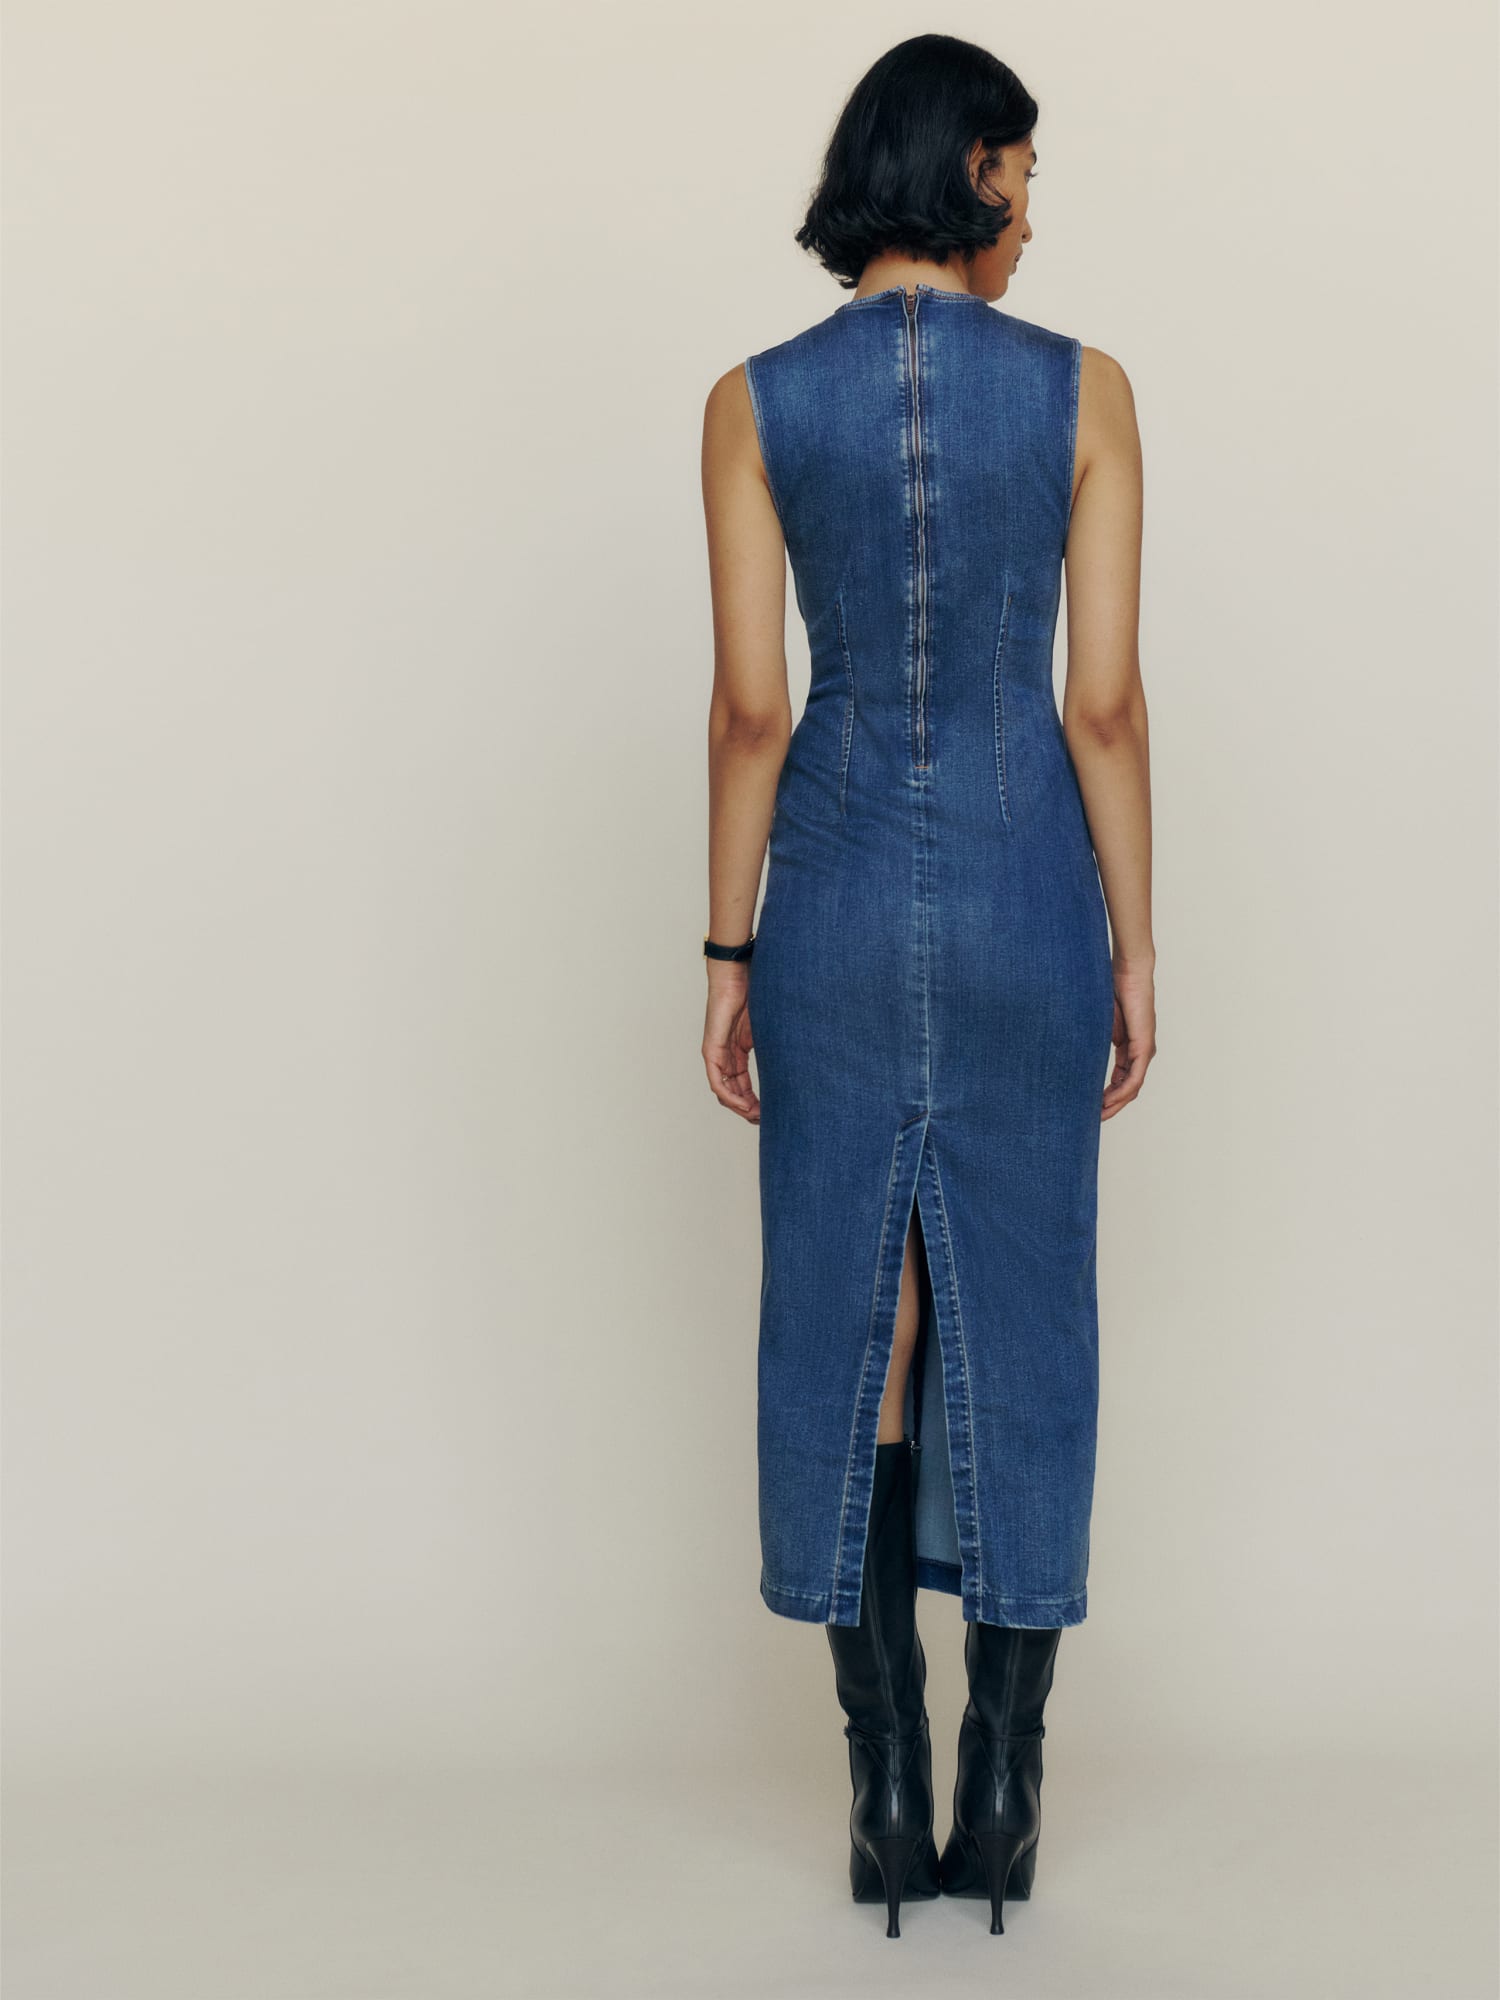 Reformation Dresses - Size Inclusive and Sustainable Too! - Denim